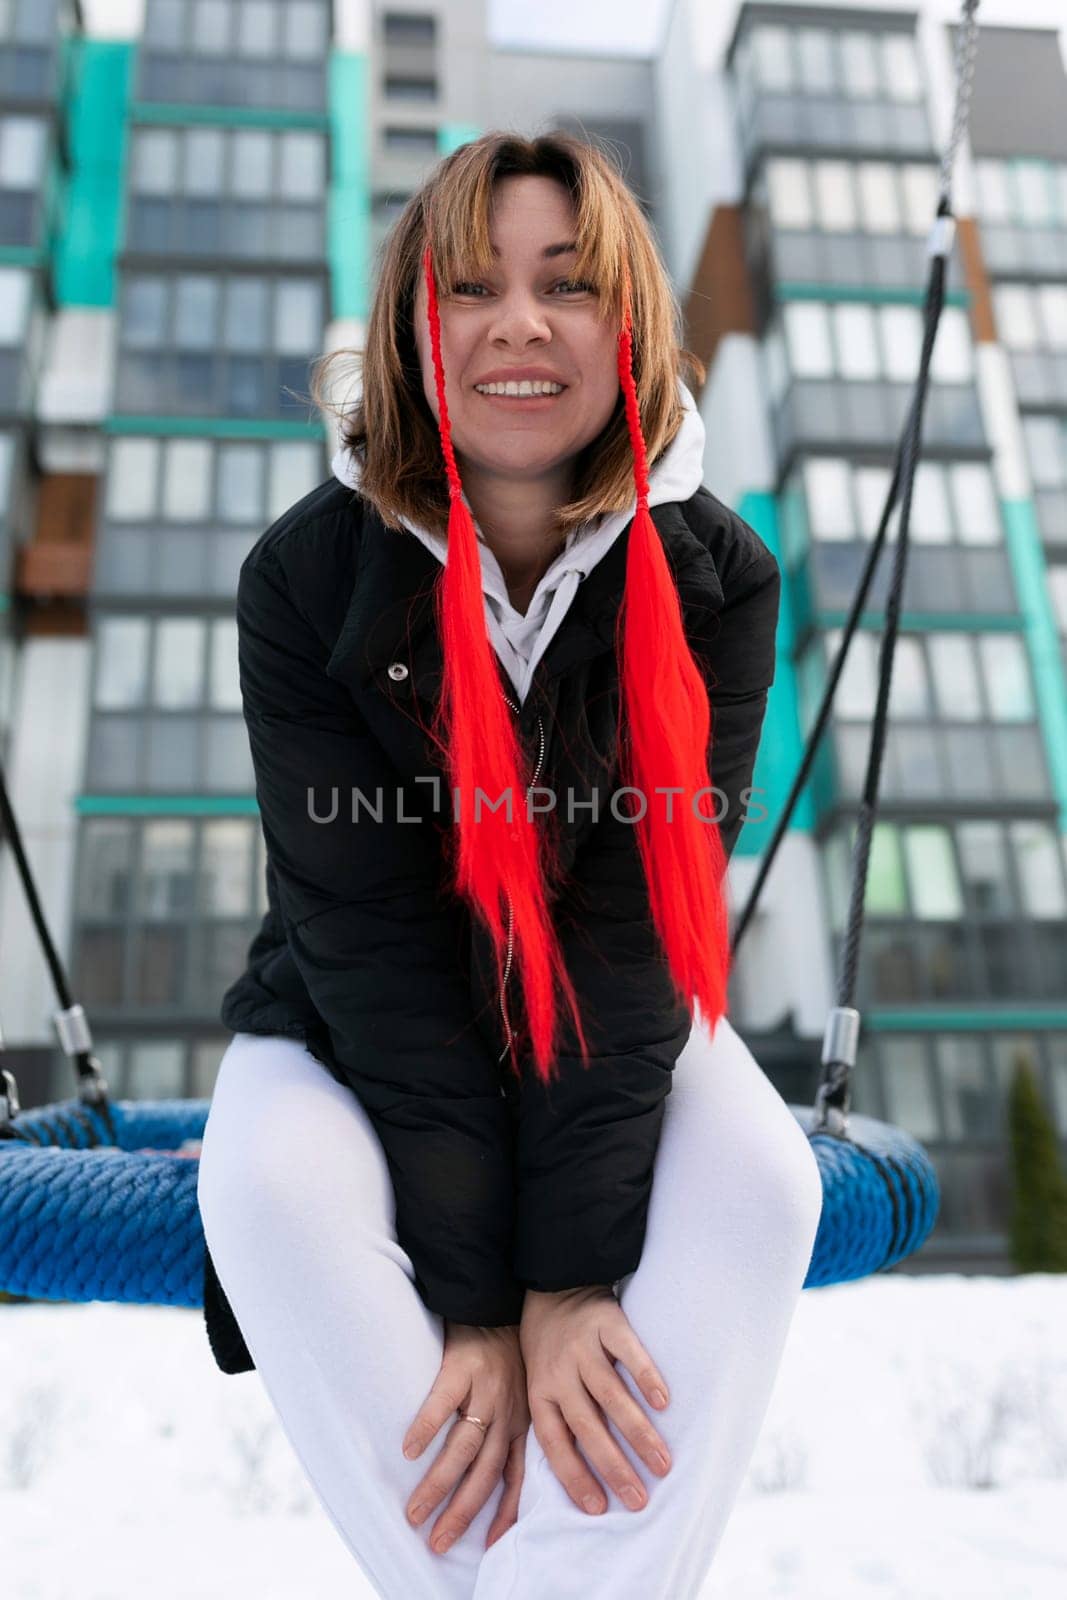 European woman having fun and fooling around outdoors in winter by TRMK